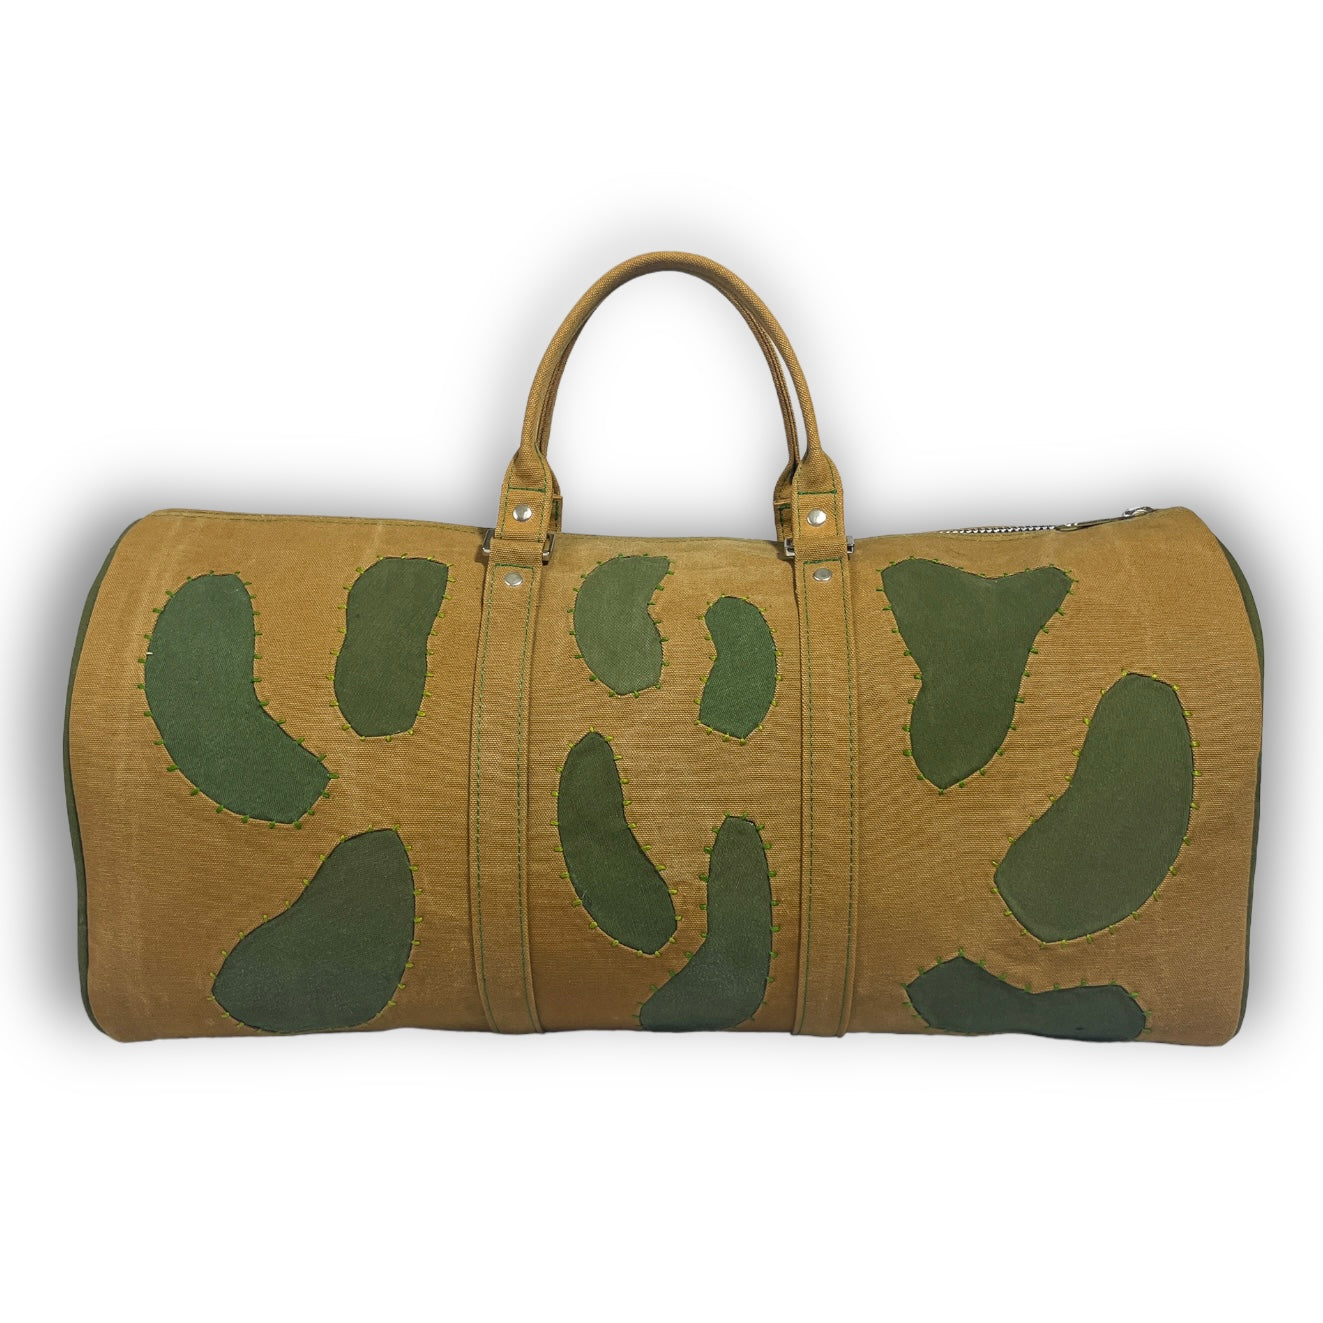 Desert Duffle Bag (Archived Dreams Collab)